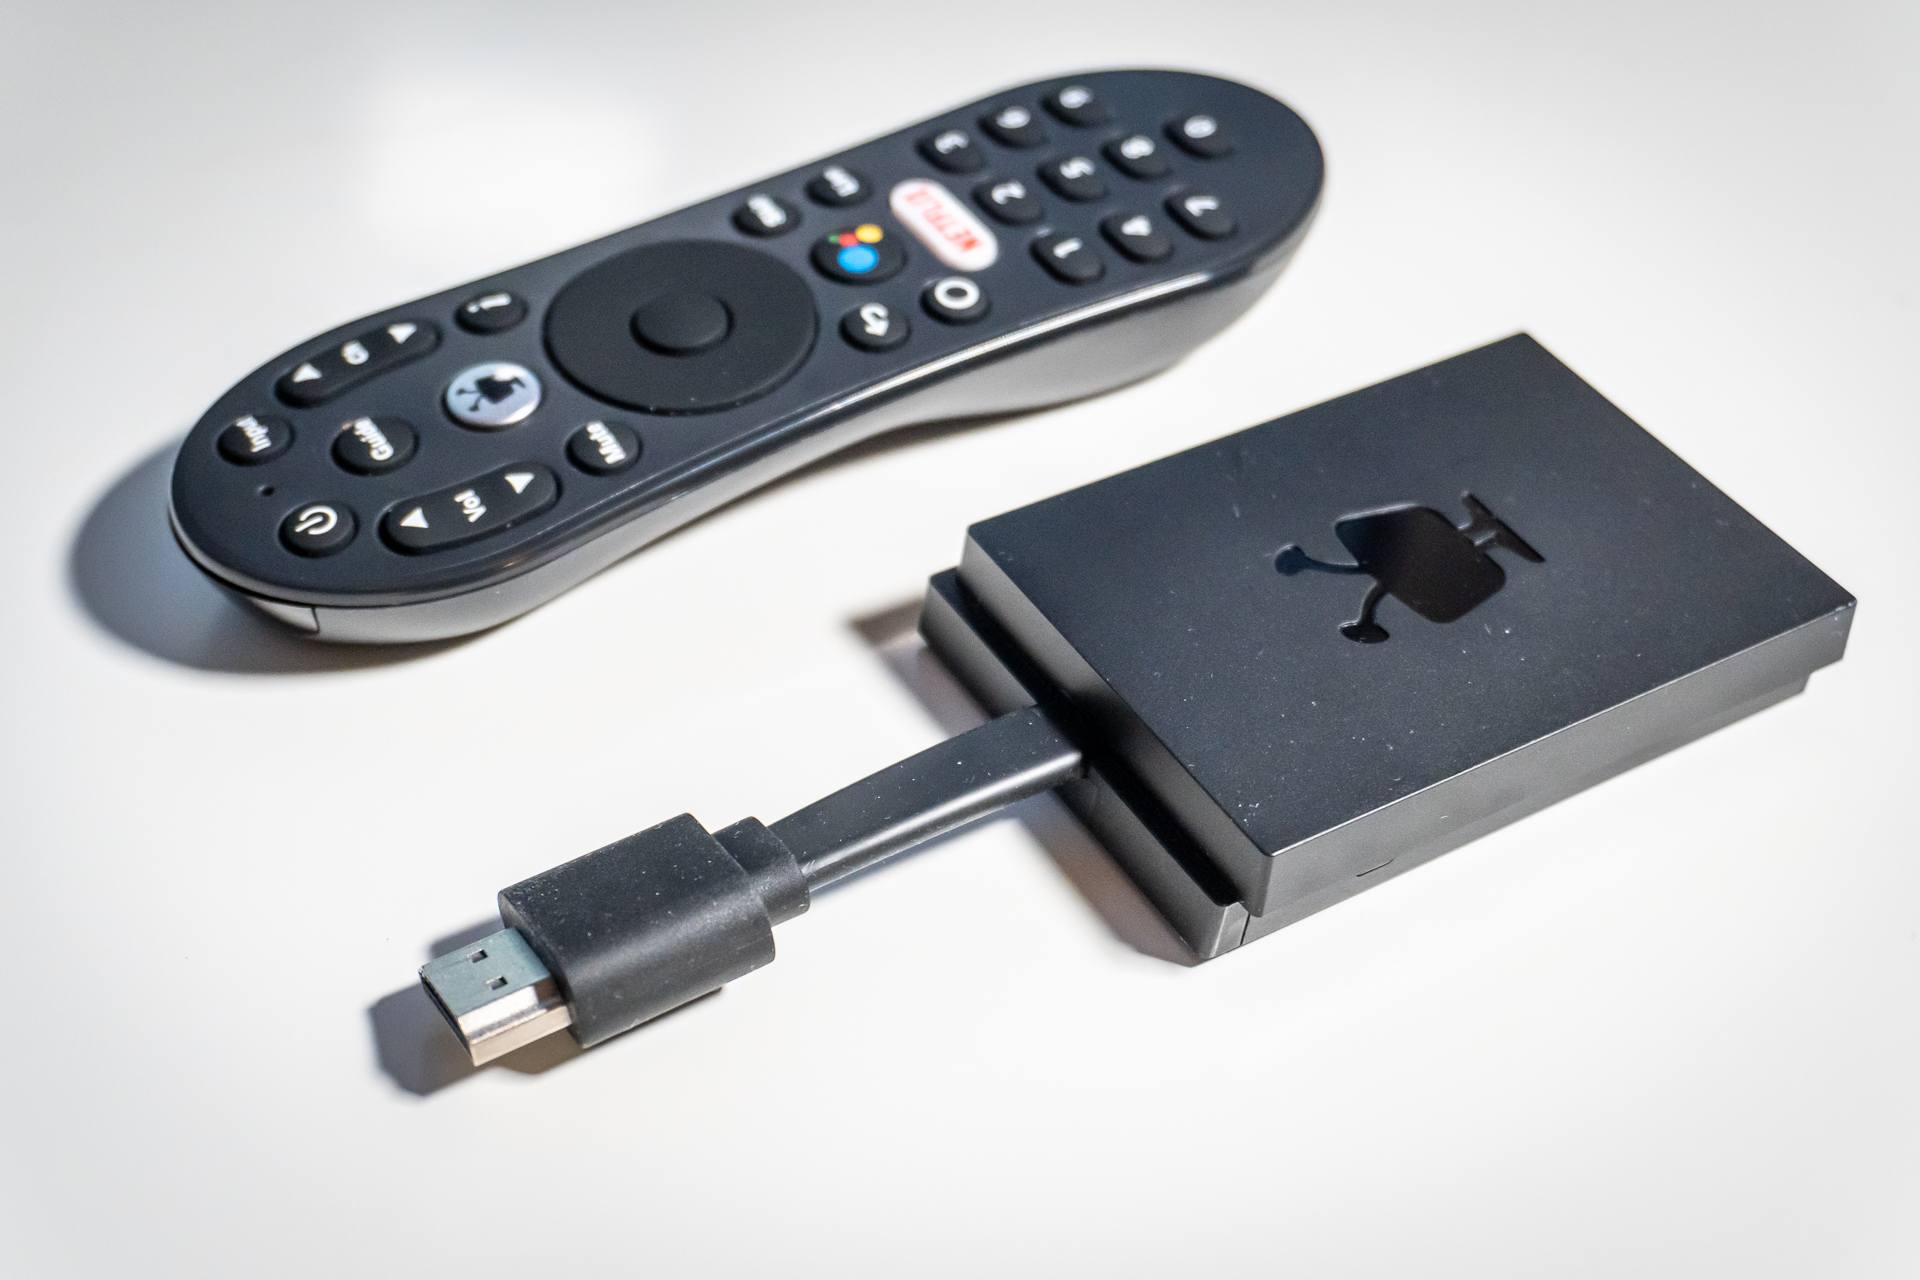 TiVo’s Stream 4k is Its Fastest-Selling Hardware